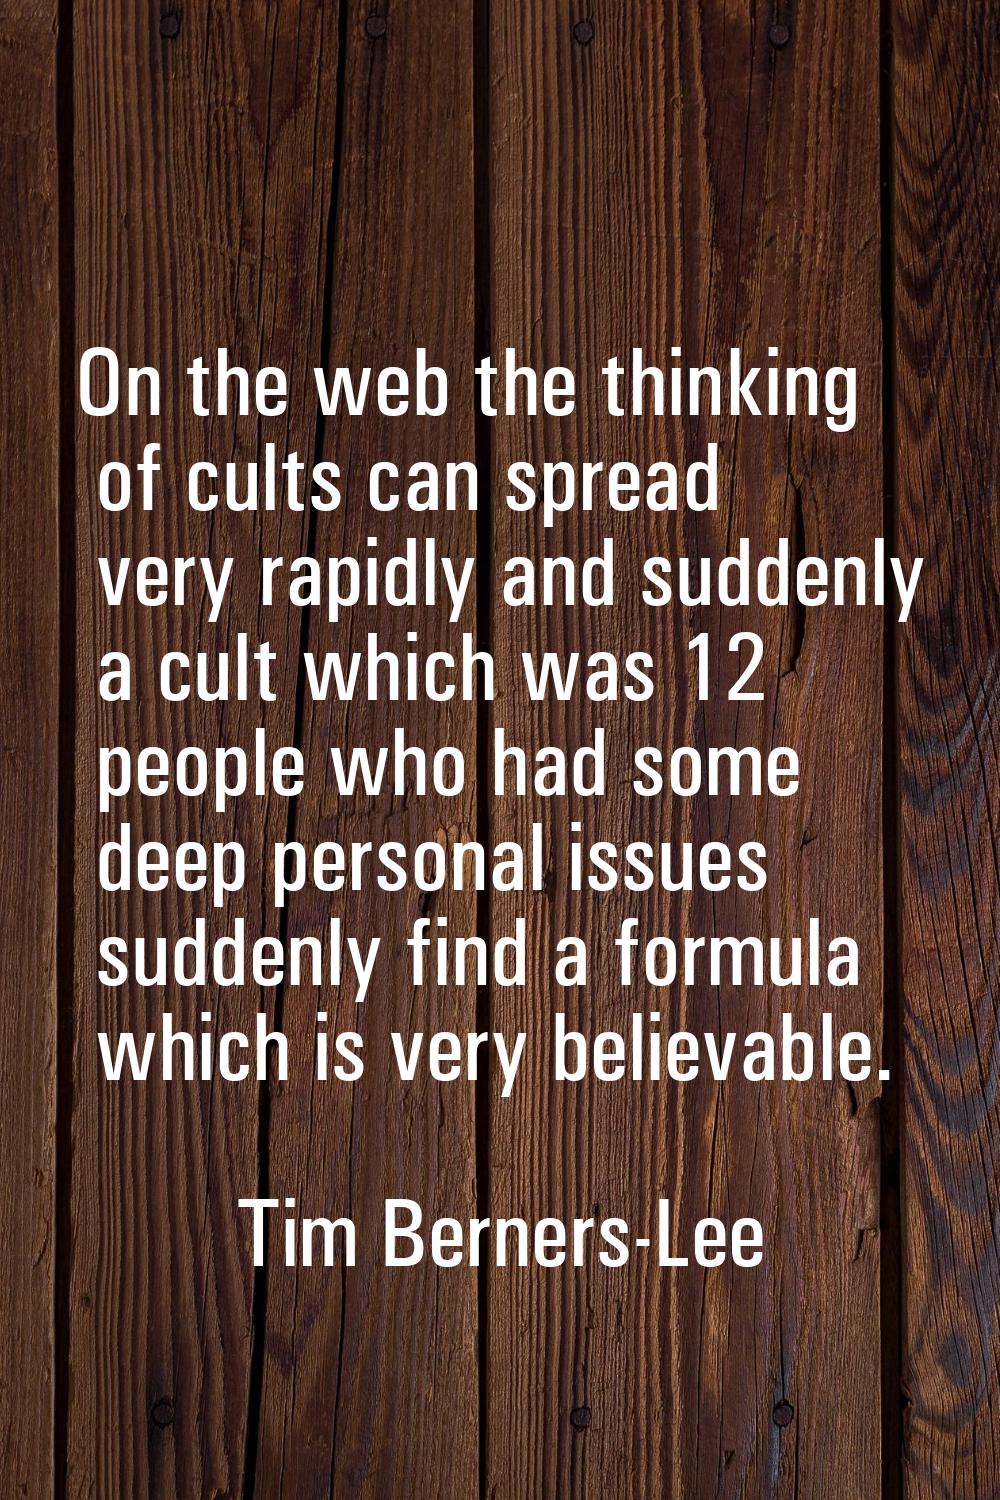 On the web the thinking of cults can spread very rapidly and suddenly a cult which was 12 people wh